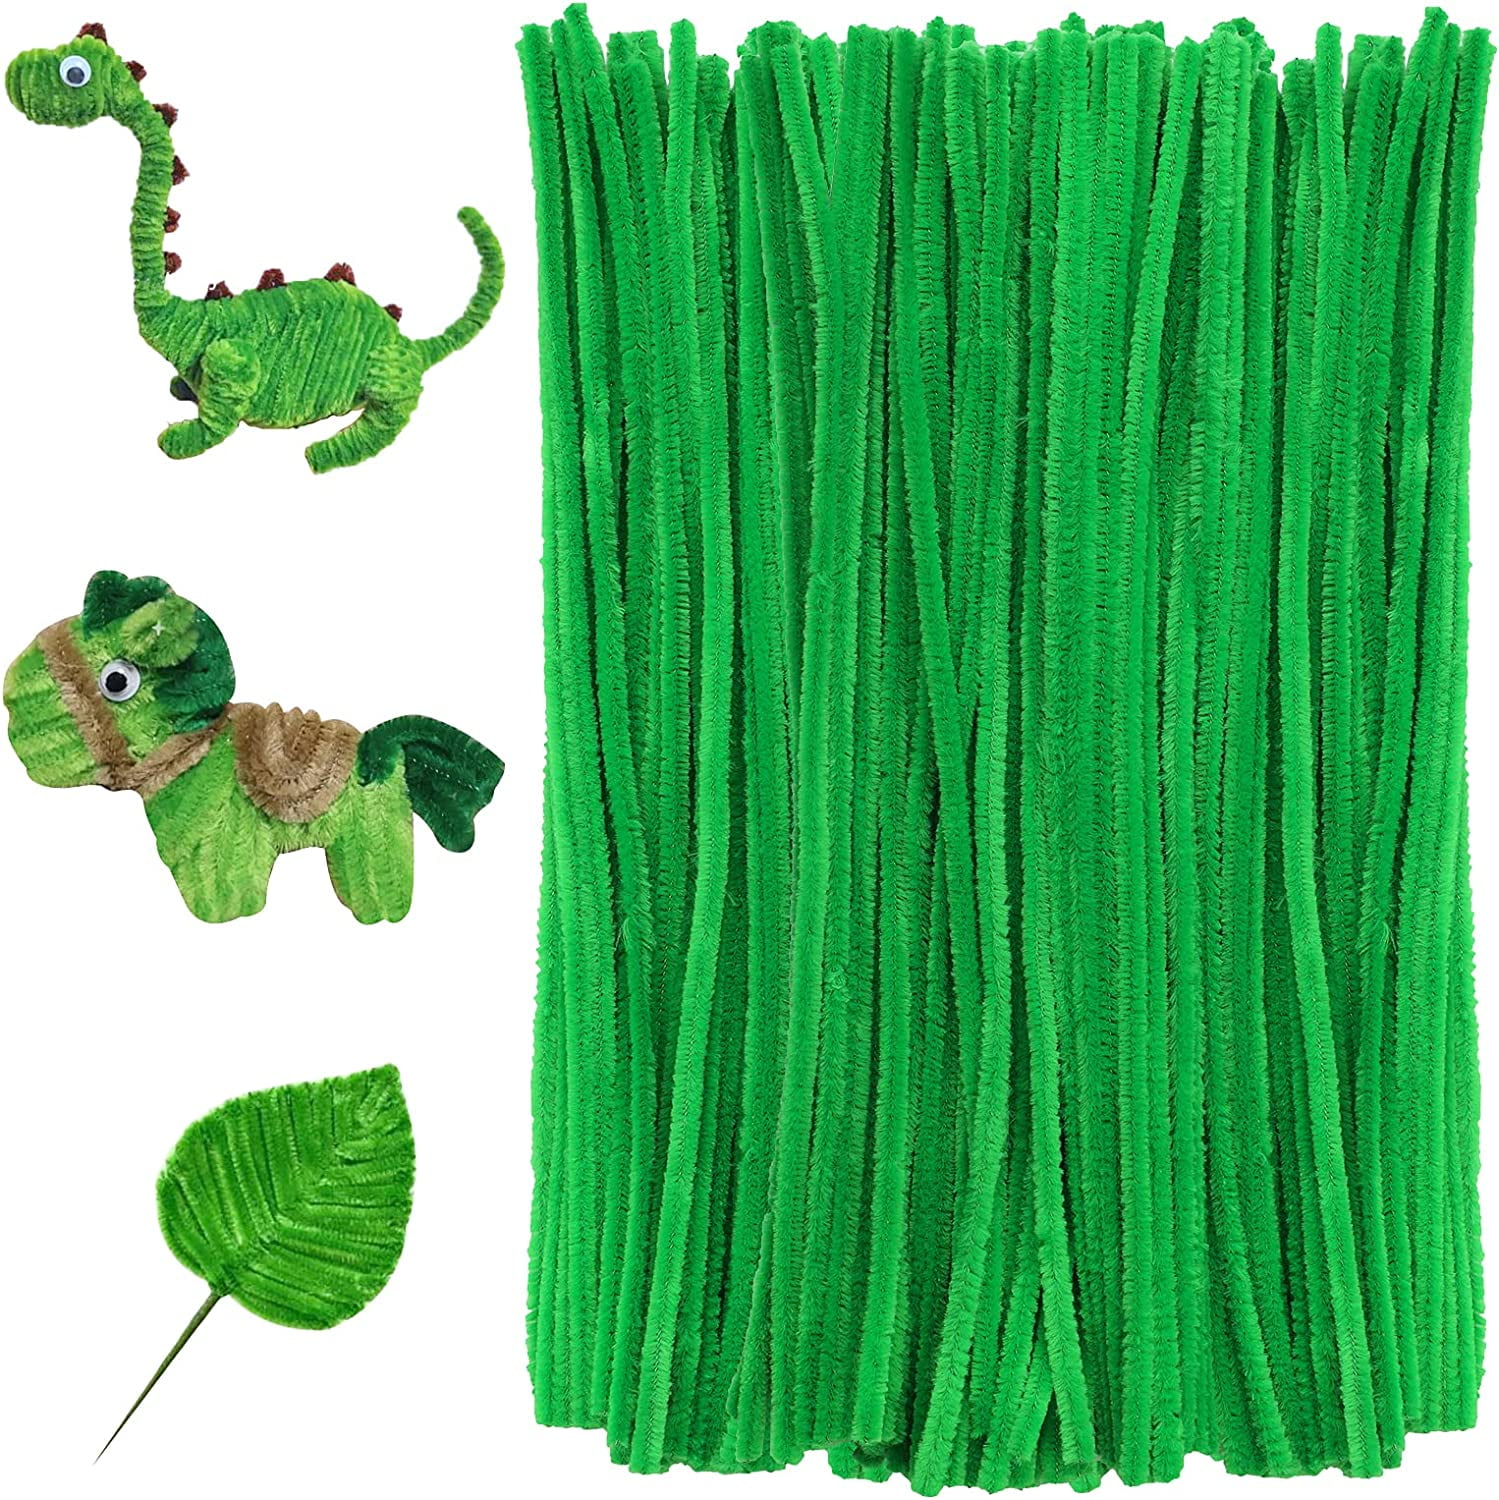  COHEALI 100 Pcs Chenille Stems Pipe Wiki Sticks for Kids Bulk  Art Pipe Cleaners Plumbing Pipe Cleaners Craft Supplies Kids Presents The  Gift Toy Cleaner Party Favors Crafts Soft Child 